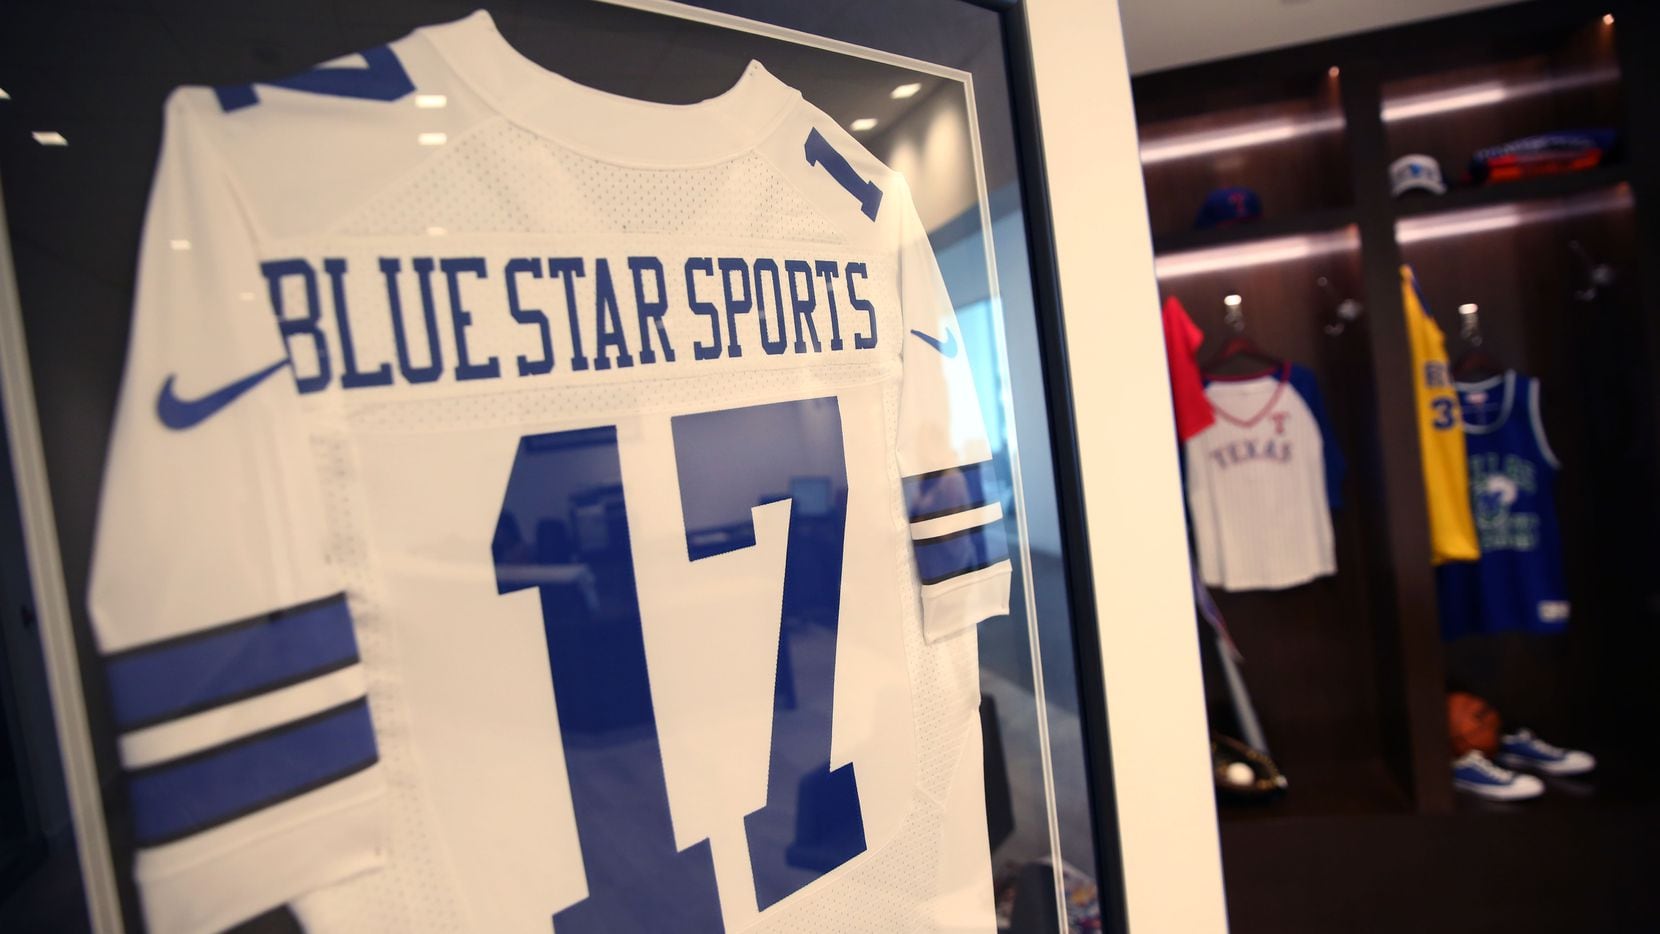 cowboys-who-fast-growing-blue-star-sports-hangs-up-jersey-on-team-inspired-name